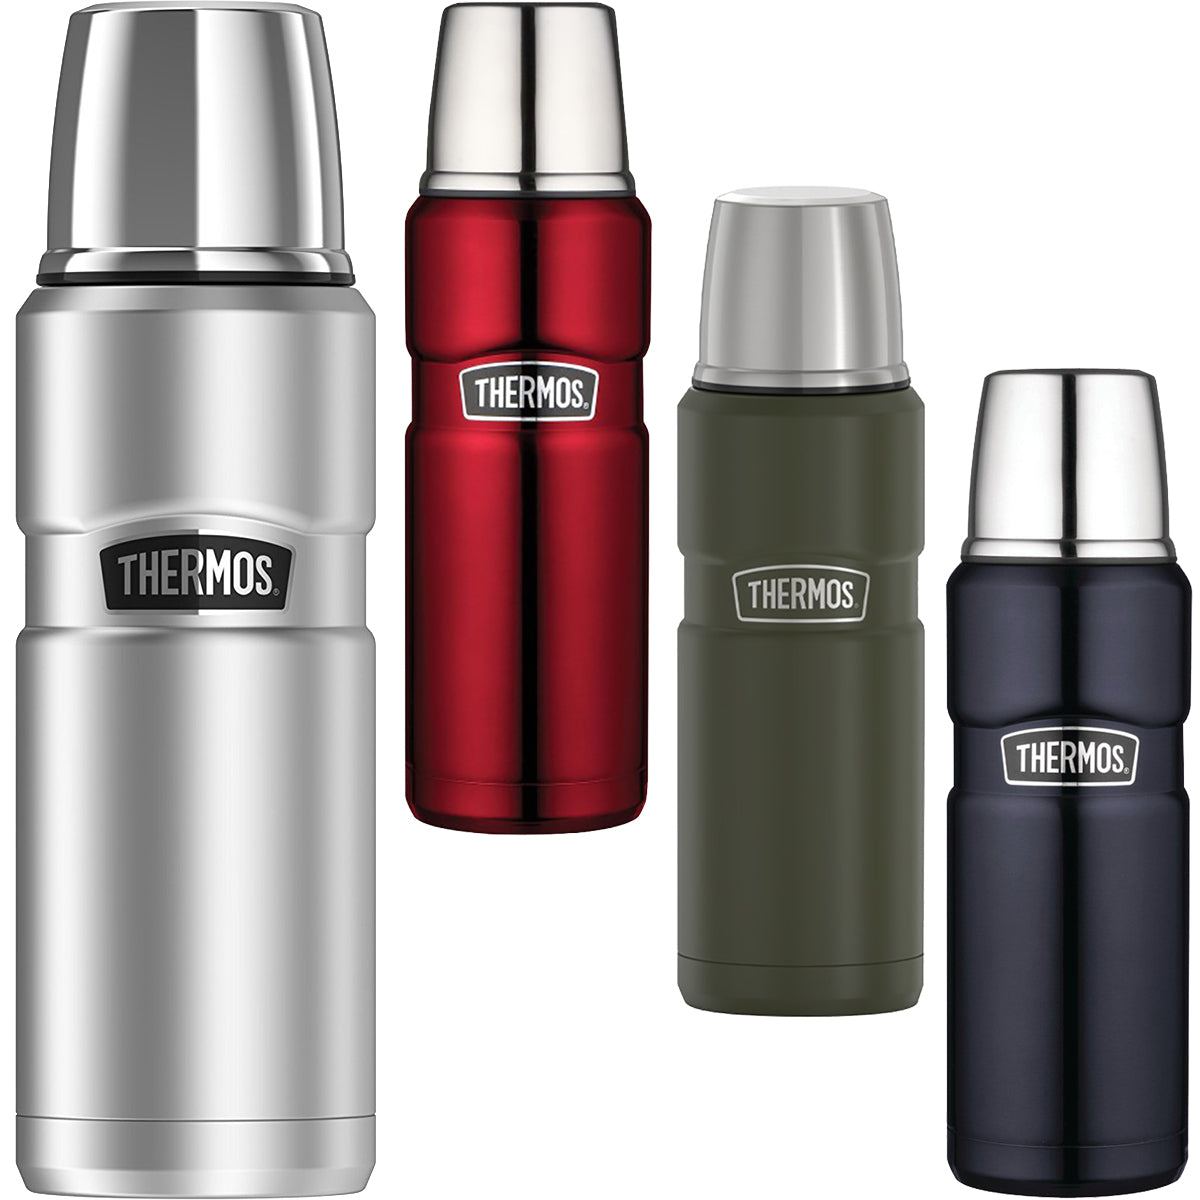 Thermos 16 oz. Stainless King Vacuum Insulated Stainless Steel Beverage Bottle Thermos